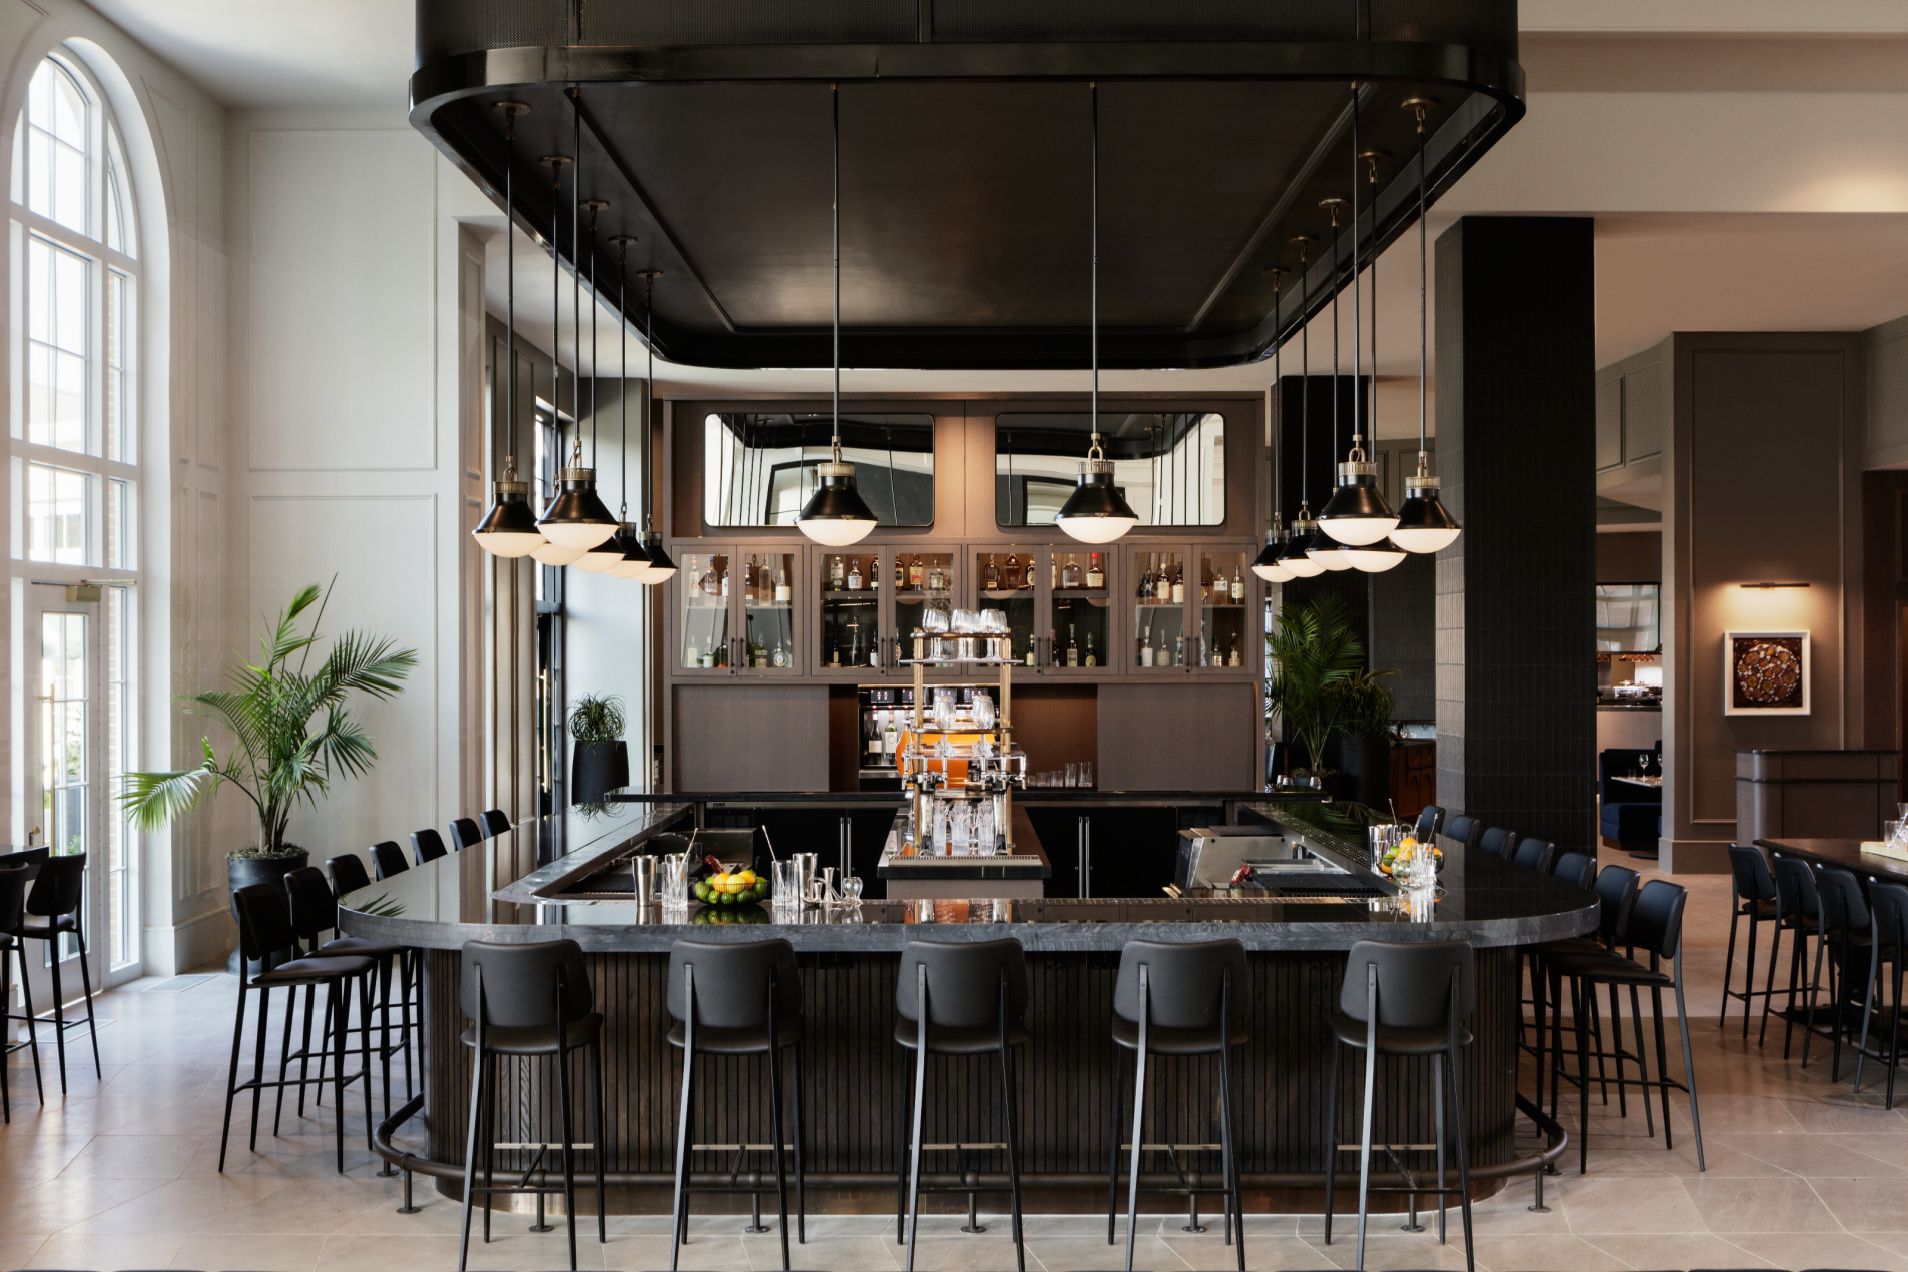 bar surrounded by restaurant seating with high ceilings and floor to ceiling windows